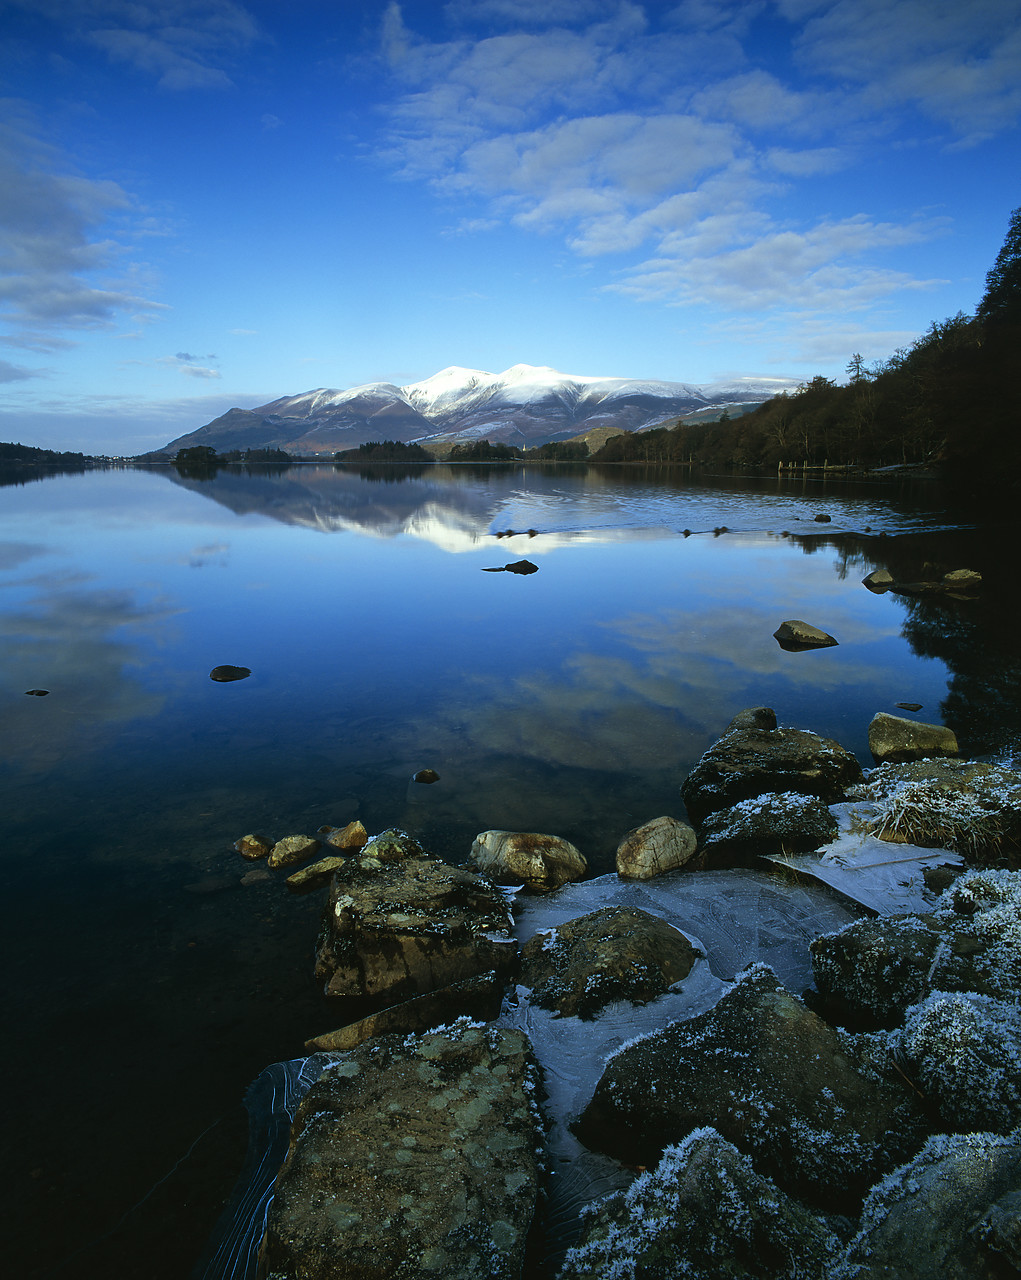 #030009-3 - Skiddaw Reflecting in Derwent Water in Winter, Lake District National Park, Cumbria, England